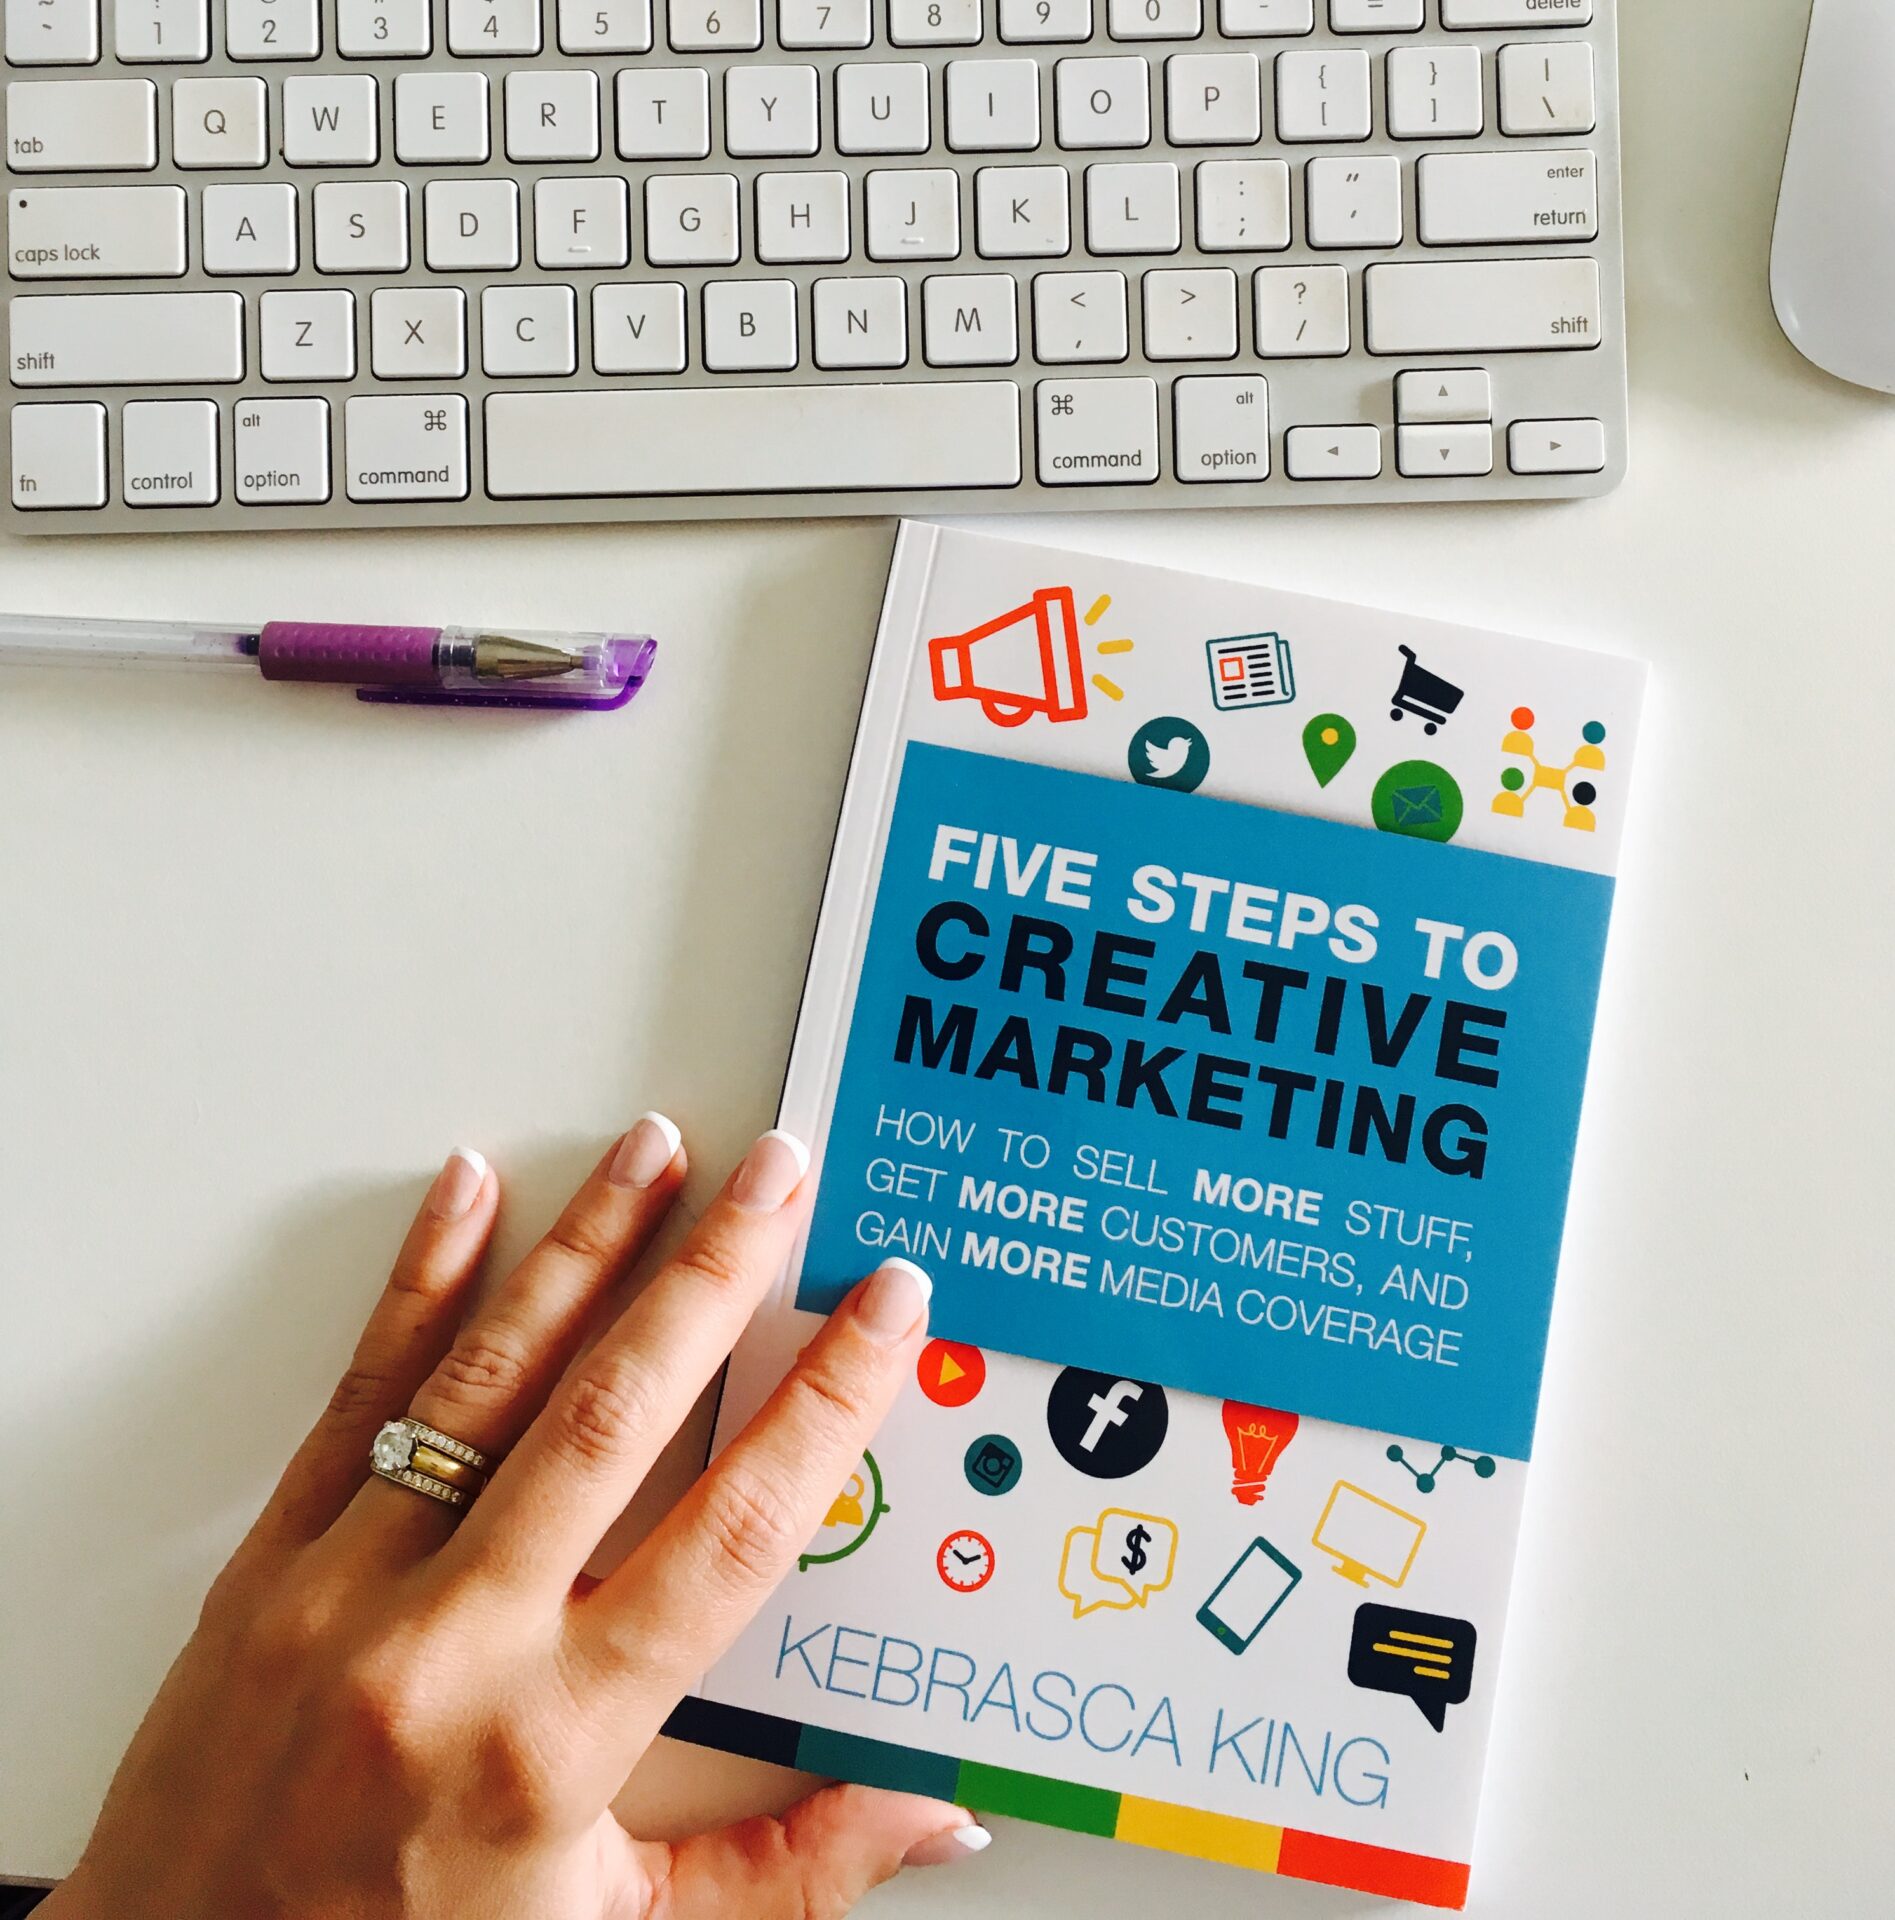 Five Steps to Creative Marketing Book by Kebrasca King